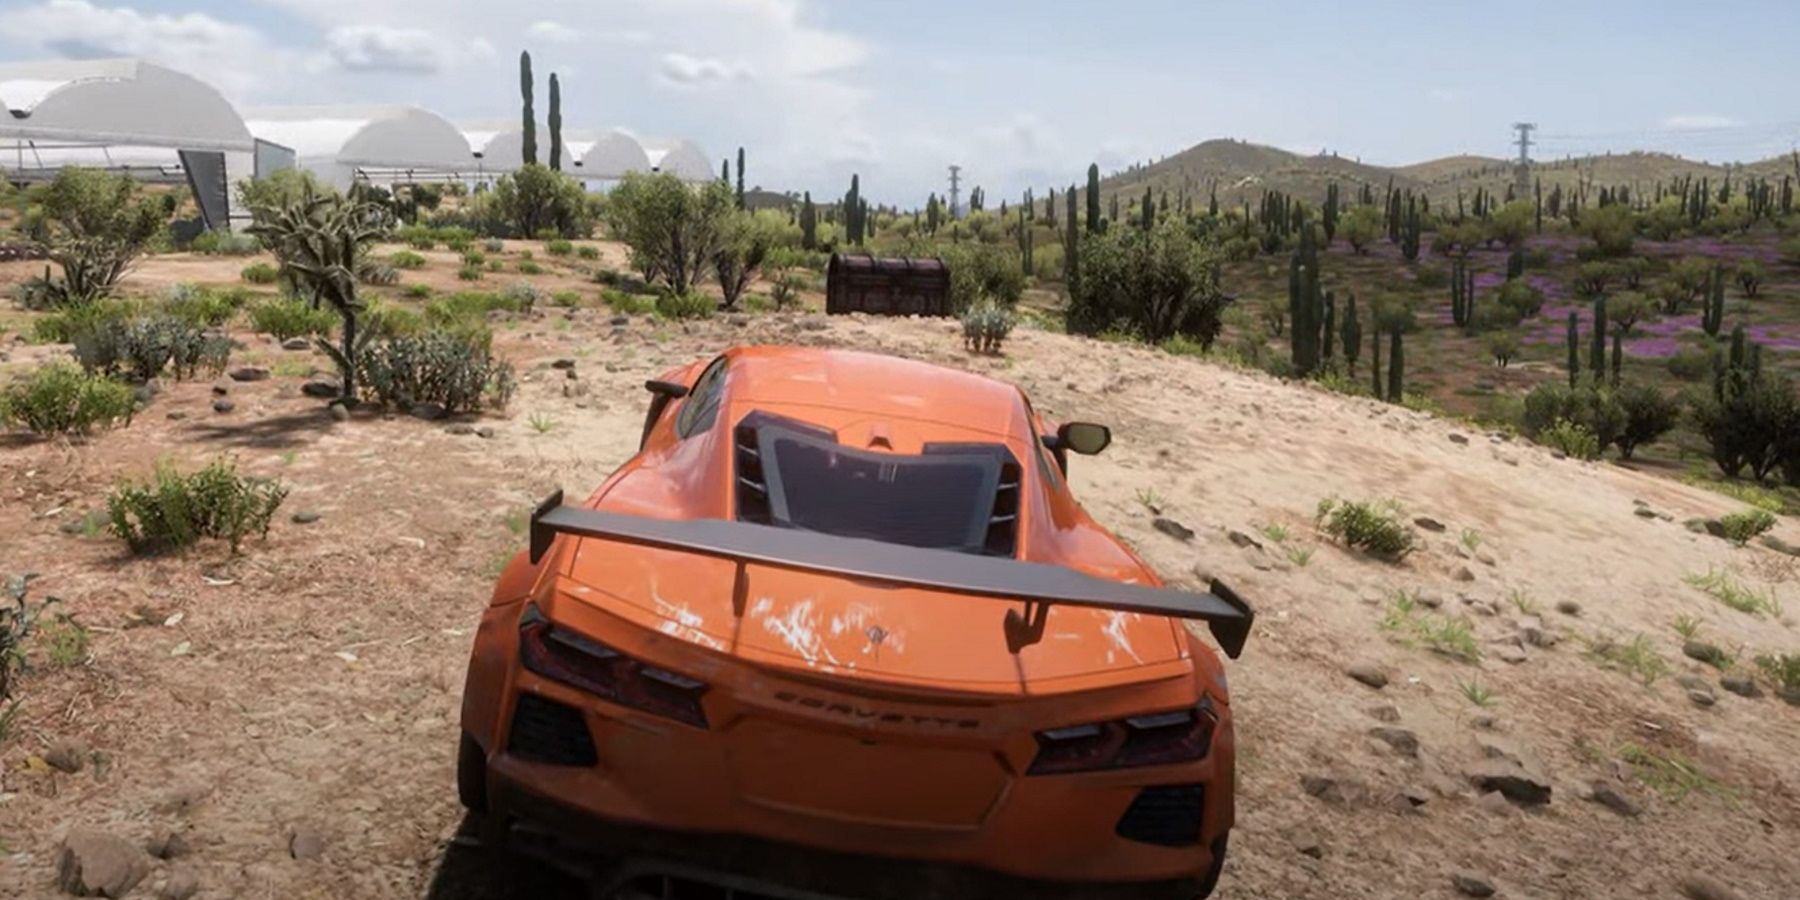 Forza Horizon 5 New Heights Treasure Chest Location in desert by white tents